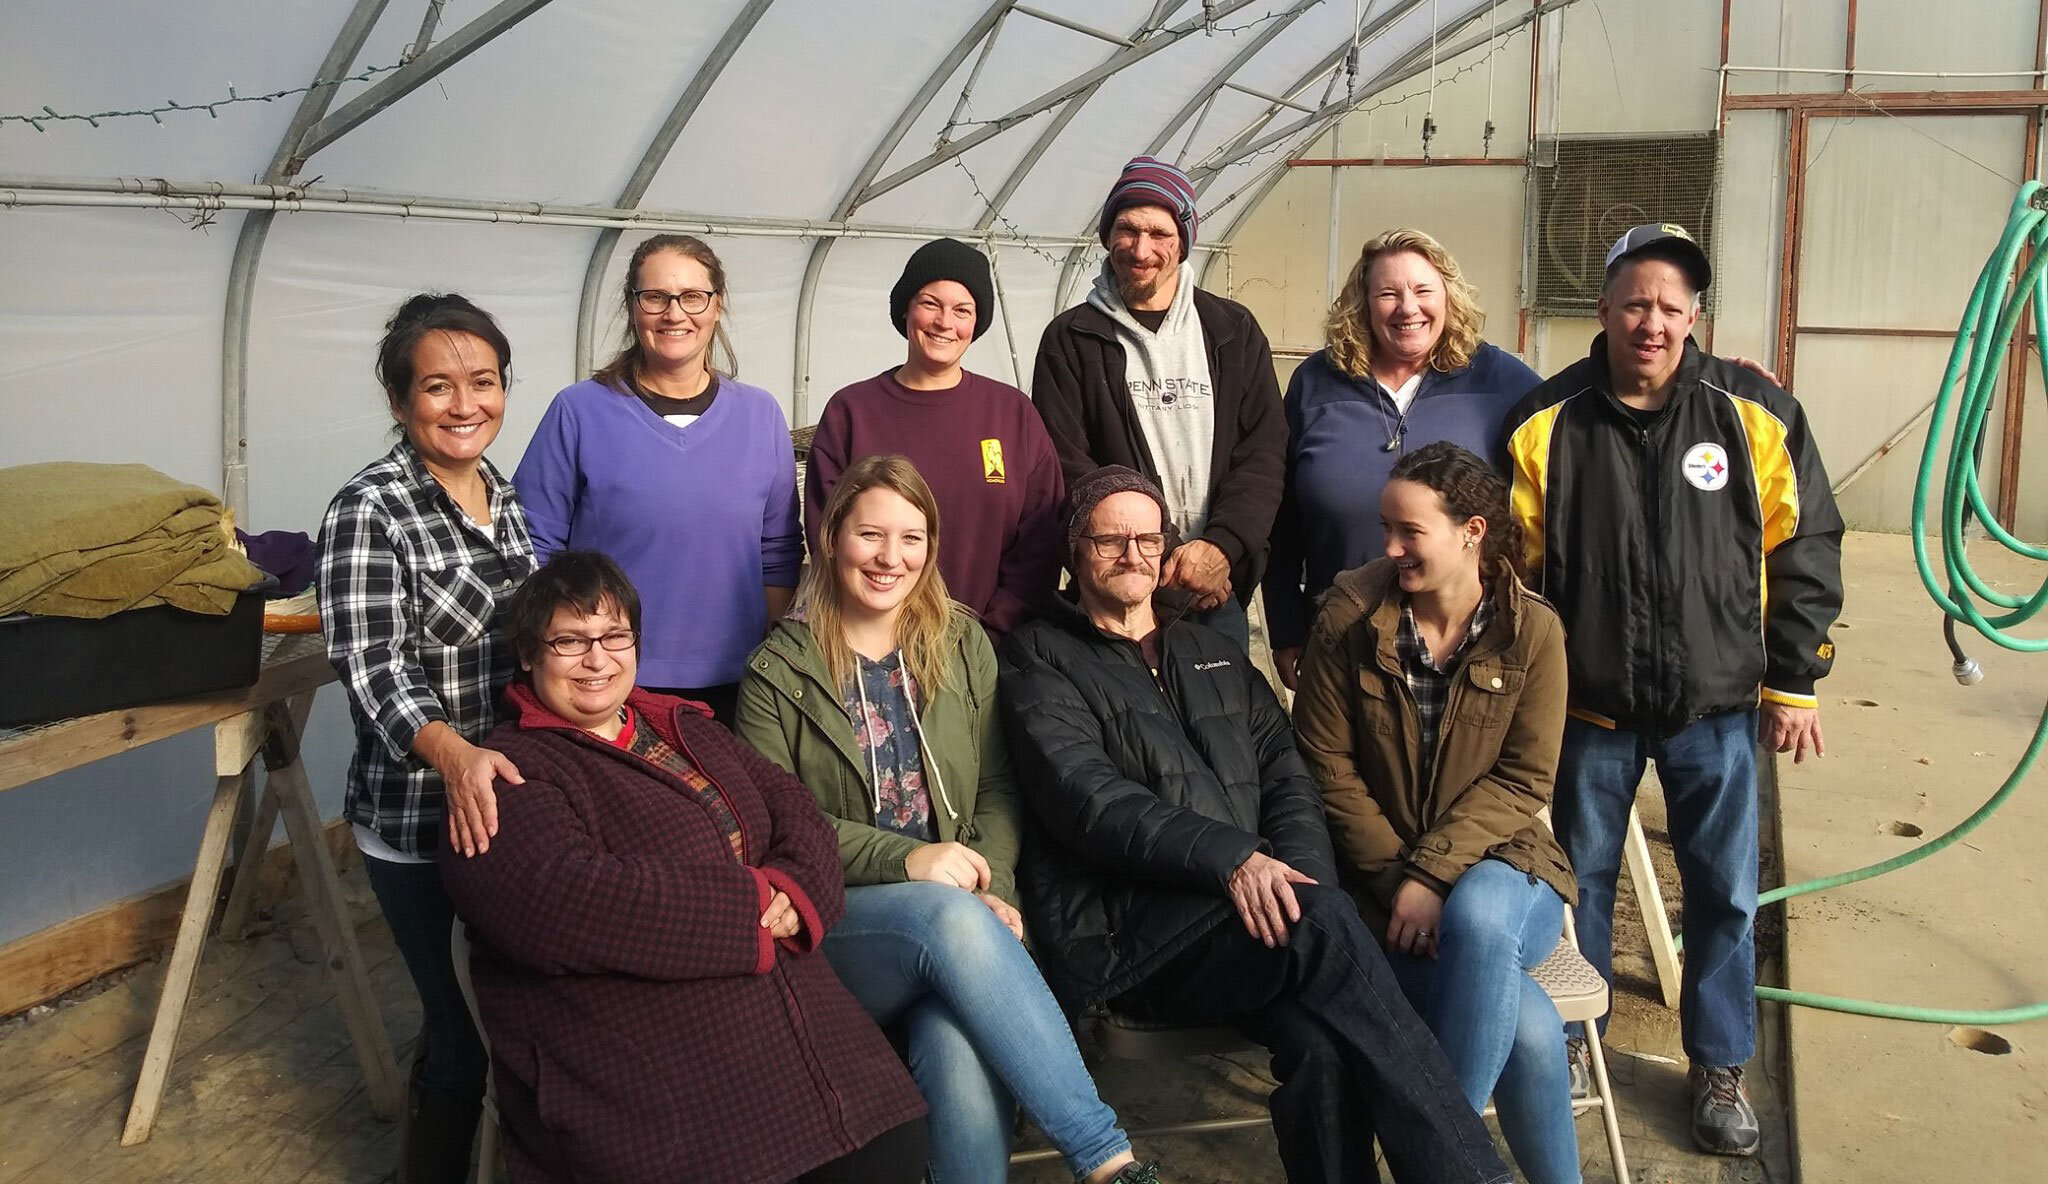  Friendship Community's Meaningful Day Academy was at the Farm each Friday, making the veggie washing fun, setting up the distribution area, and getting things done in the greenhouses.  